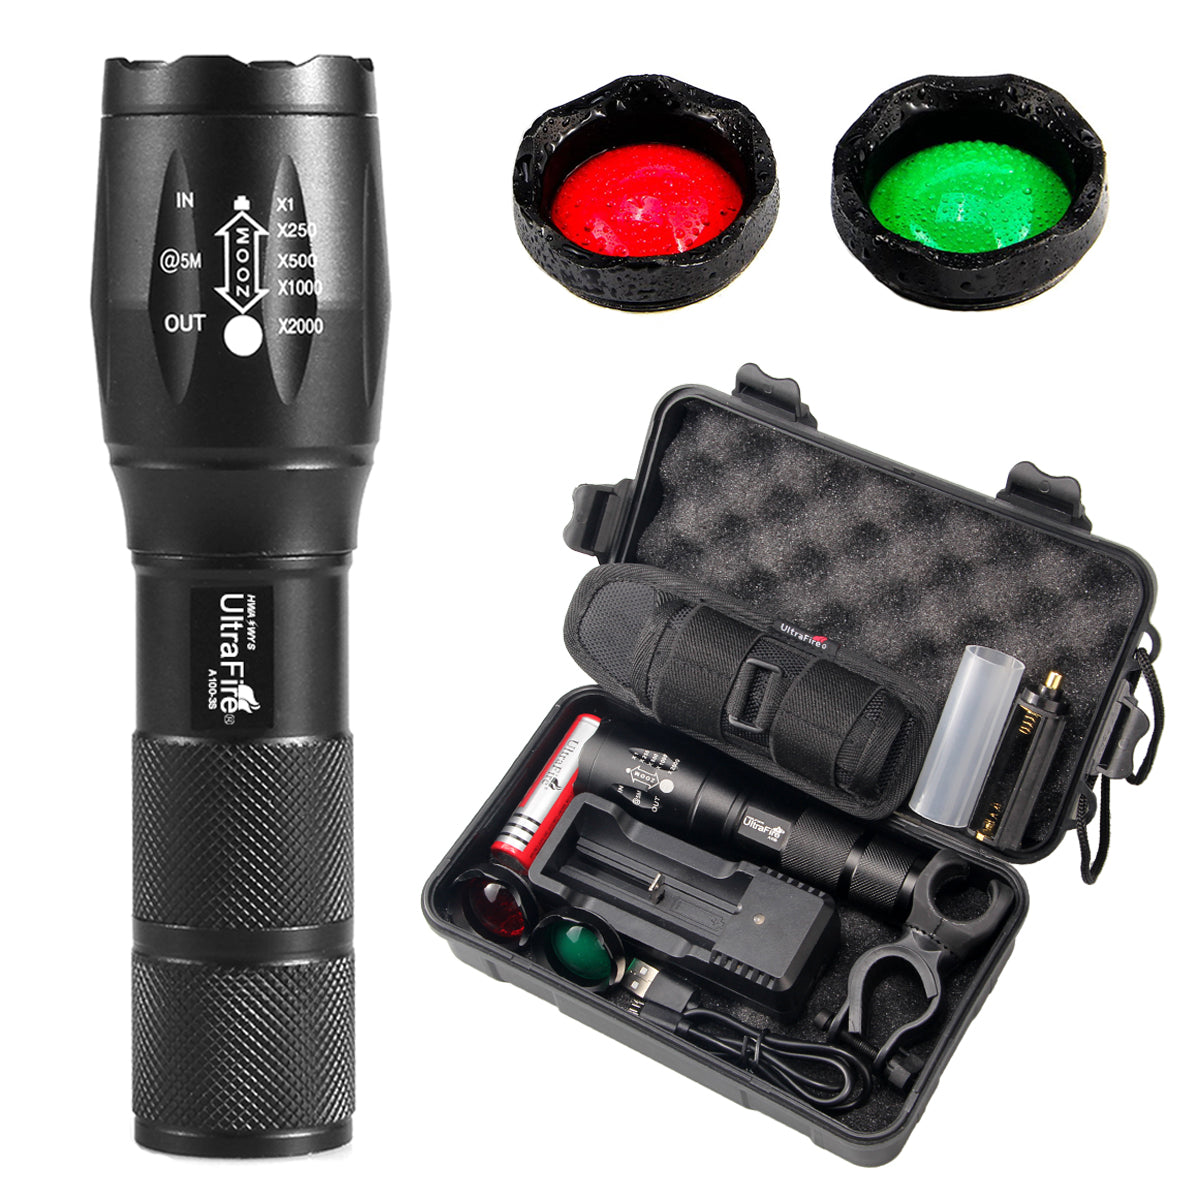 UltraFire A100 LED Flashlight with 3 colors Exchange Glass Lens (Generate RED or GREEN light )